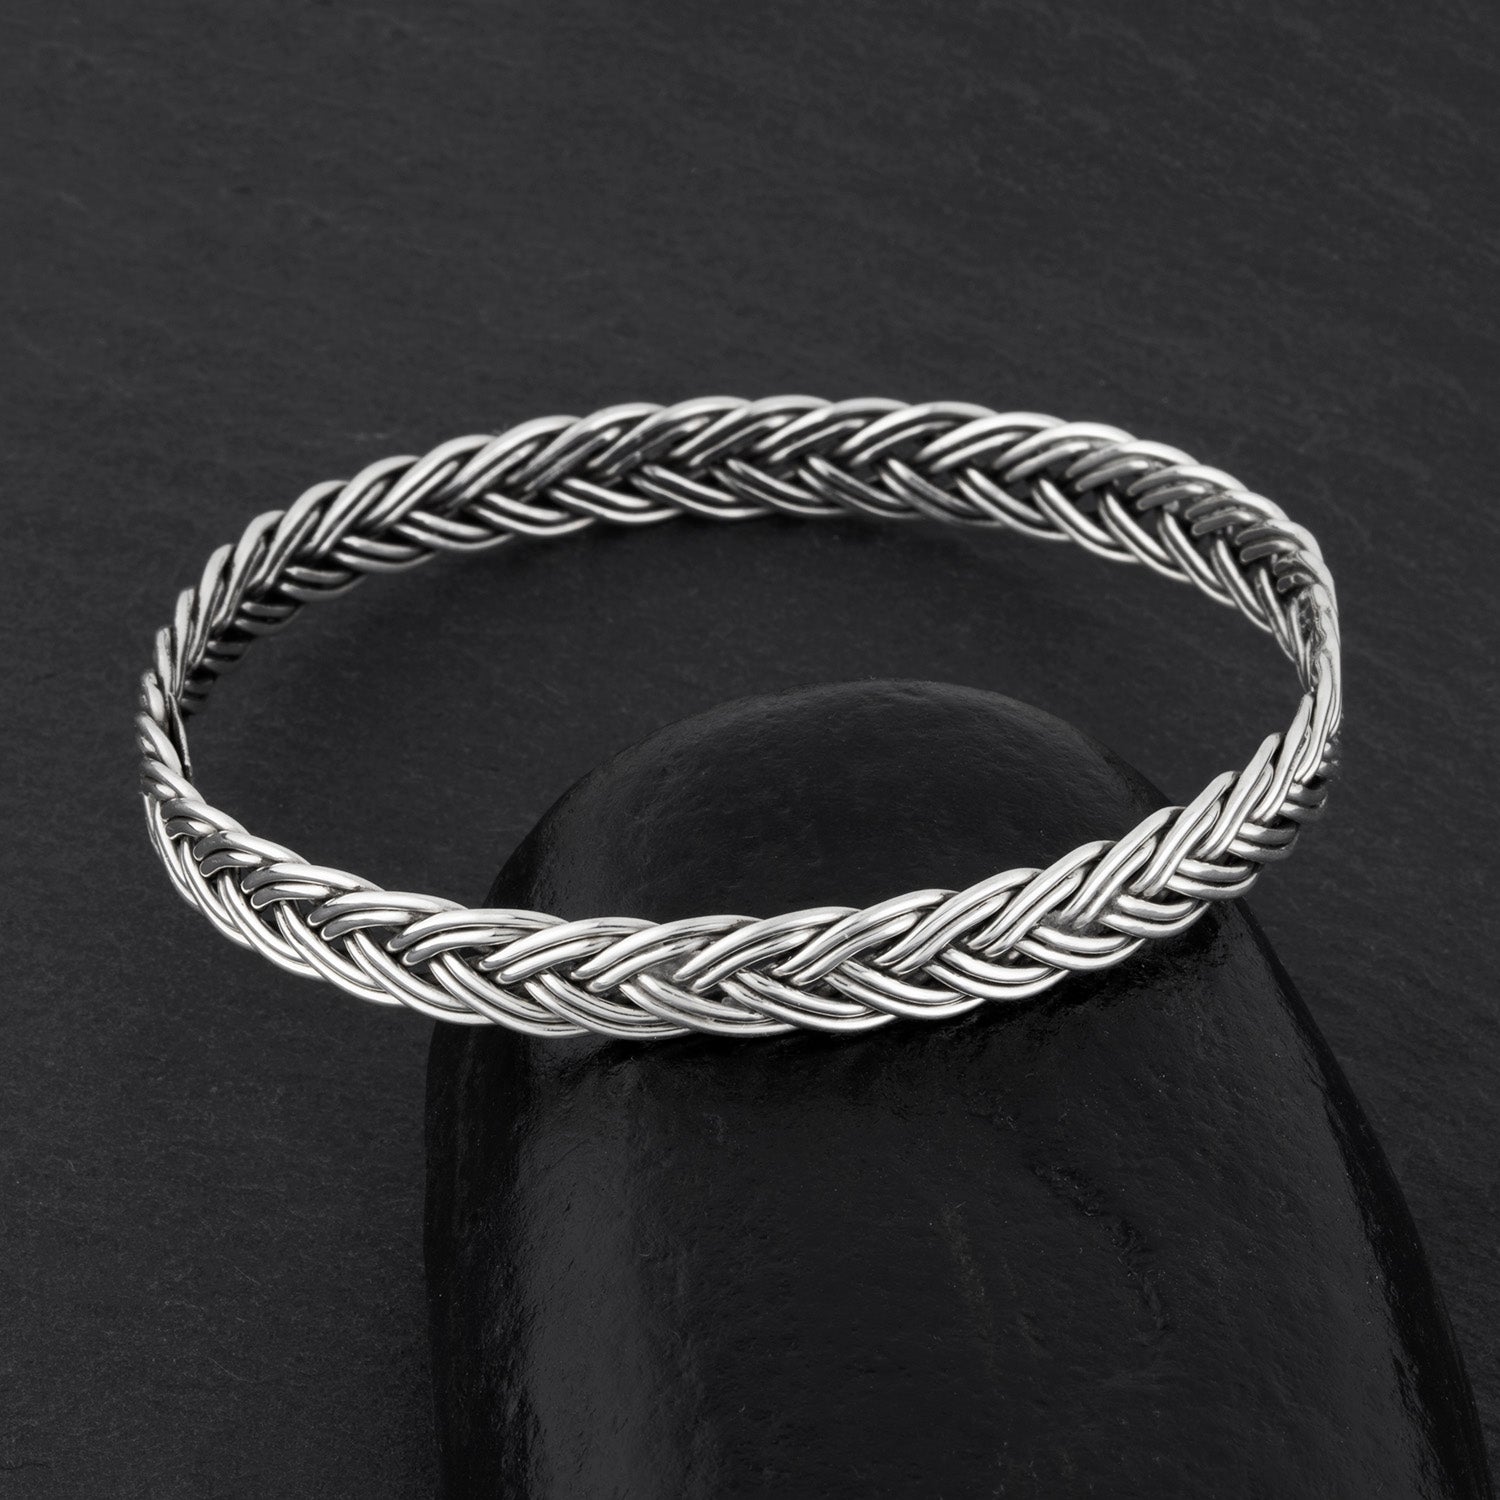 Mexican silver braided bangle bracelet